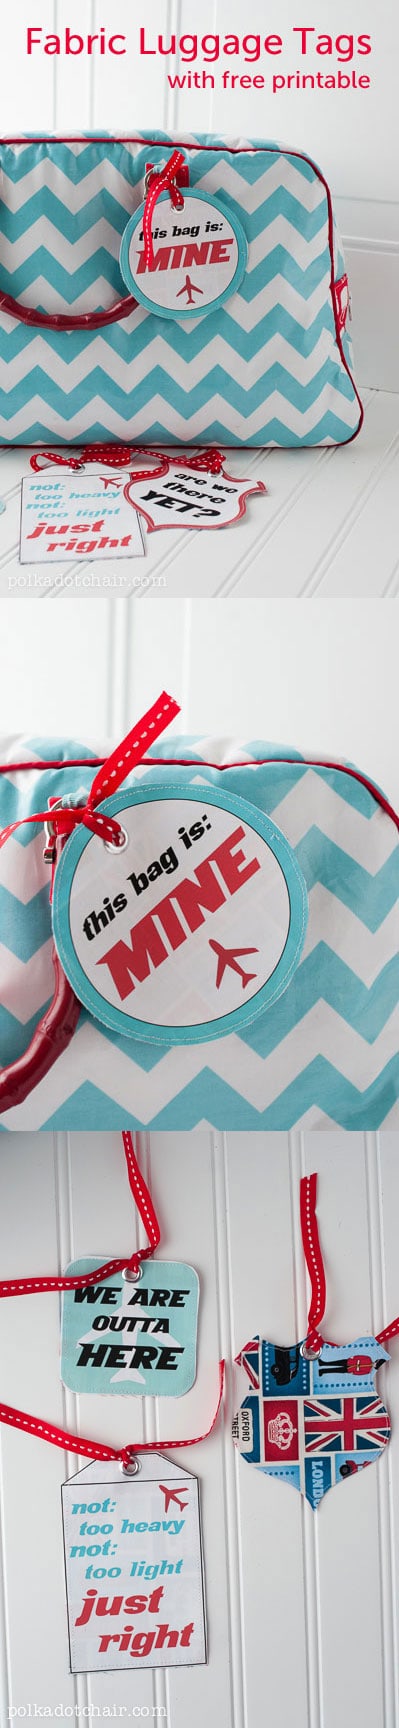 Printable Luggage Tags Template from www.polkadotchair.com